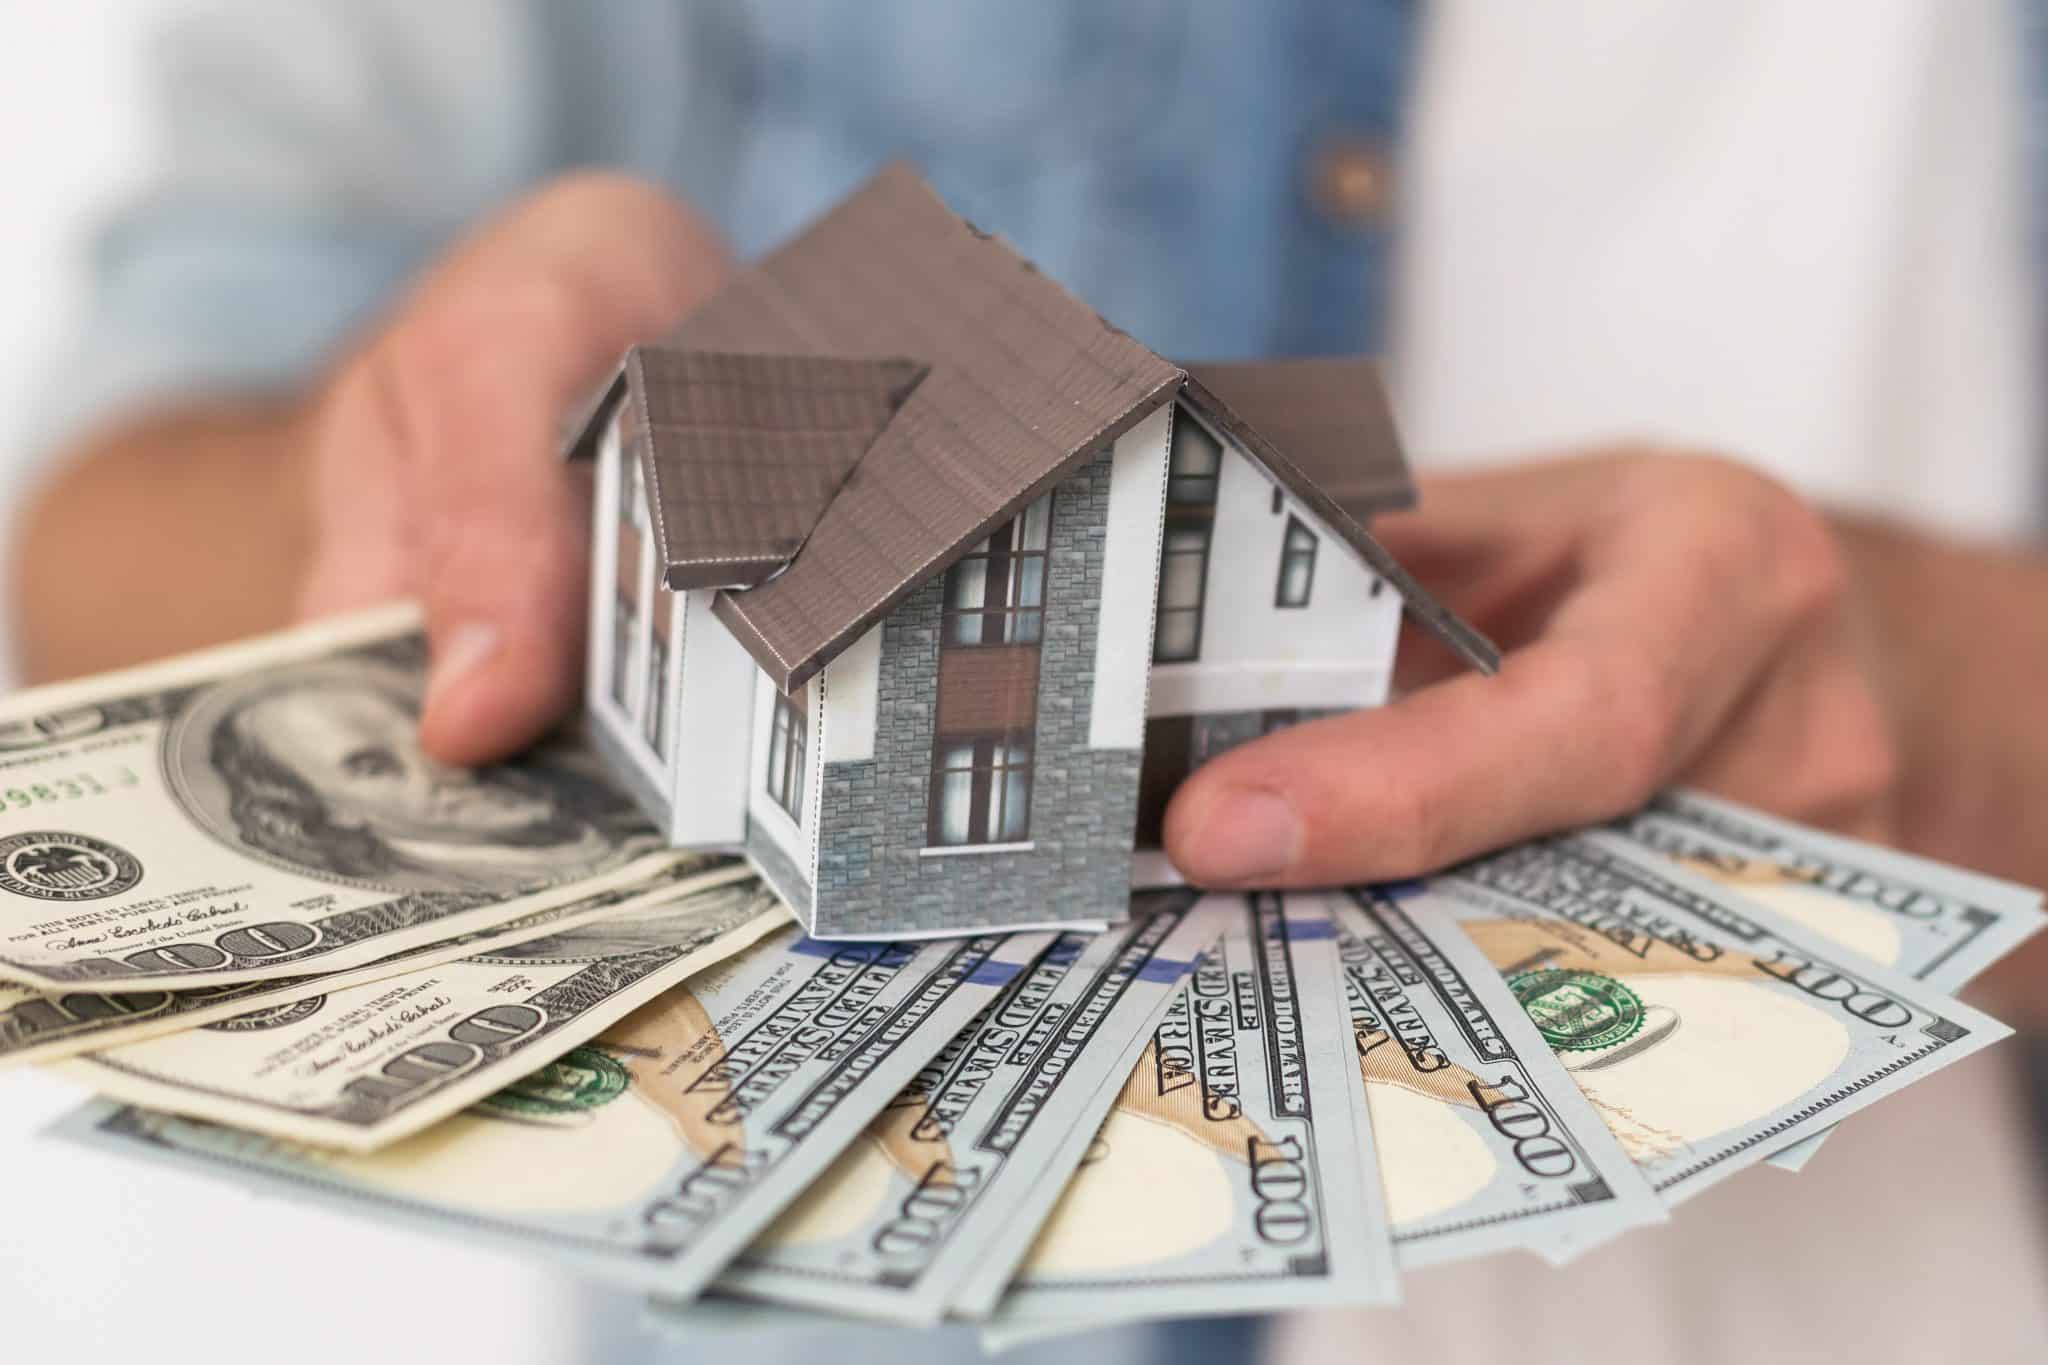 Breaking Down The Cost When Selling A House: What To Expect